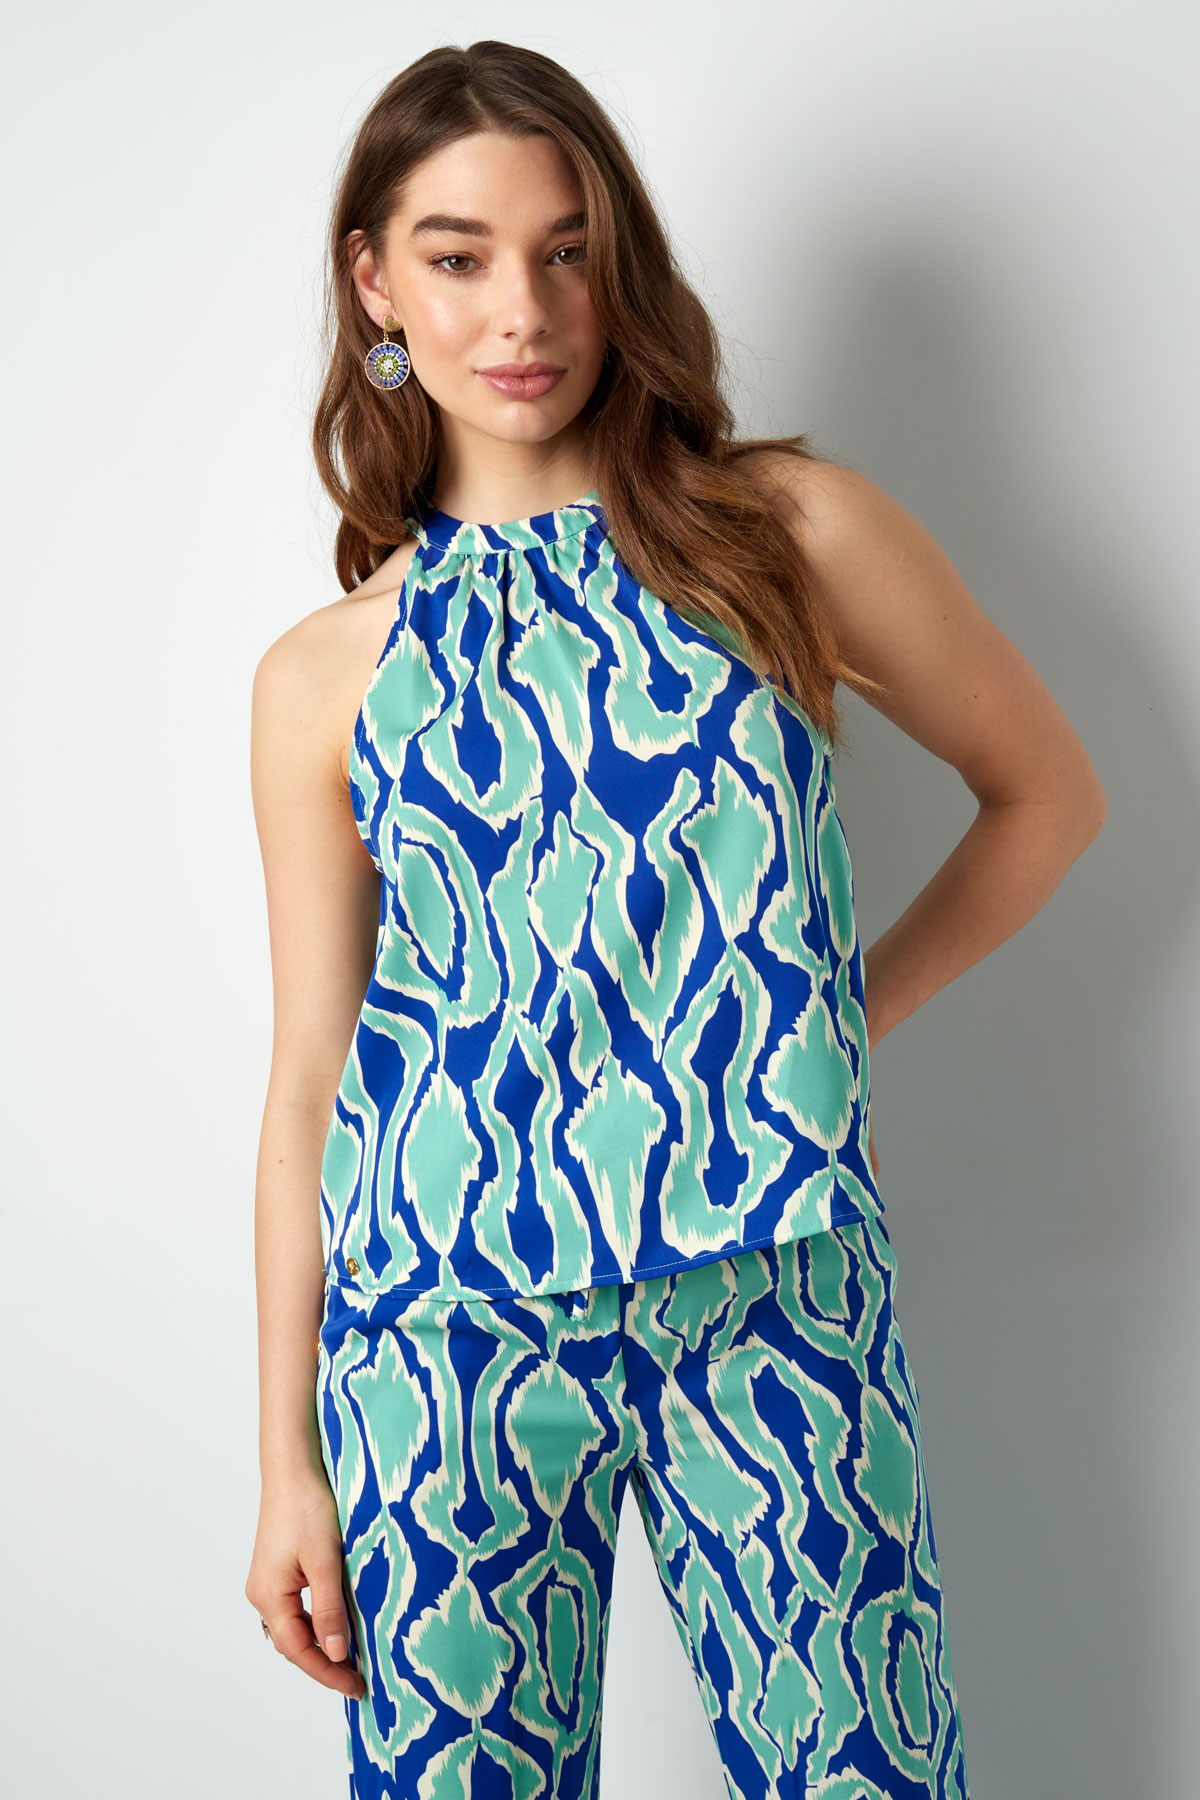 Colorful halter top with print - blue/green  Picture2